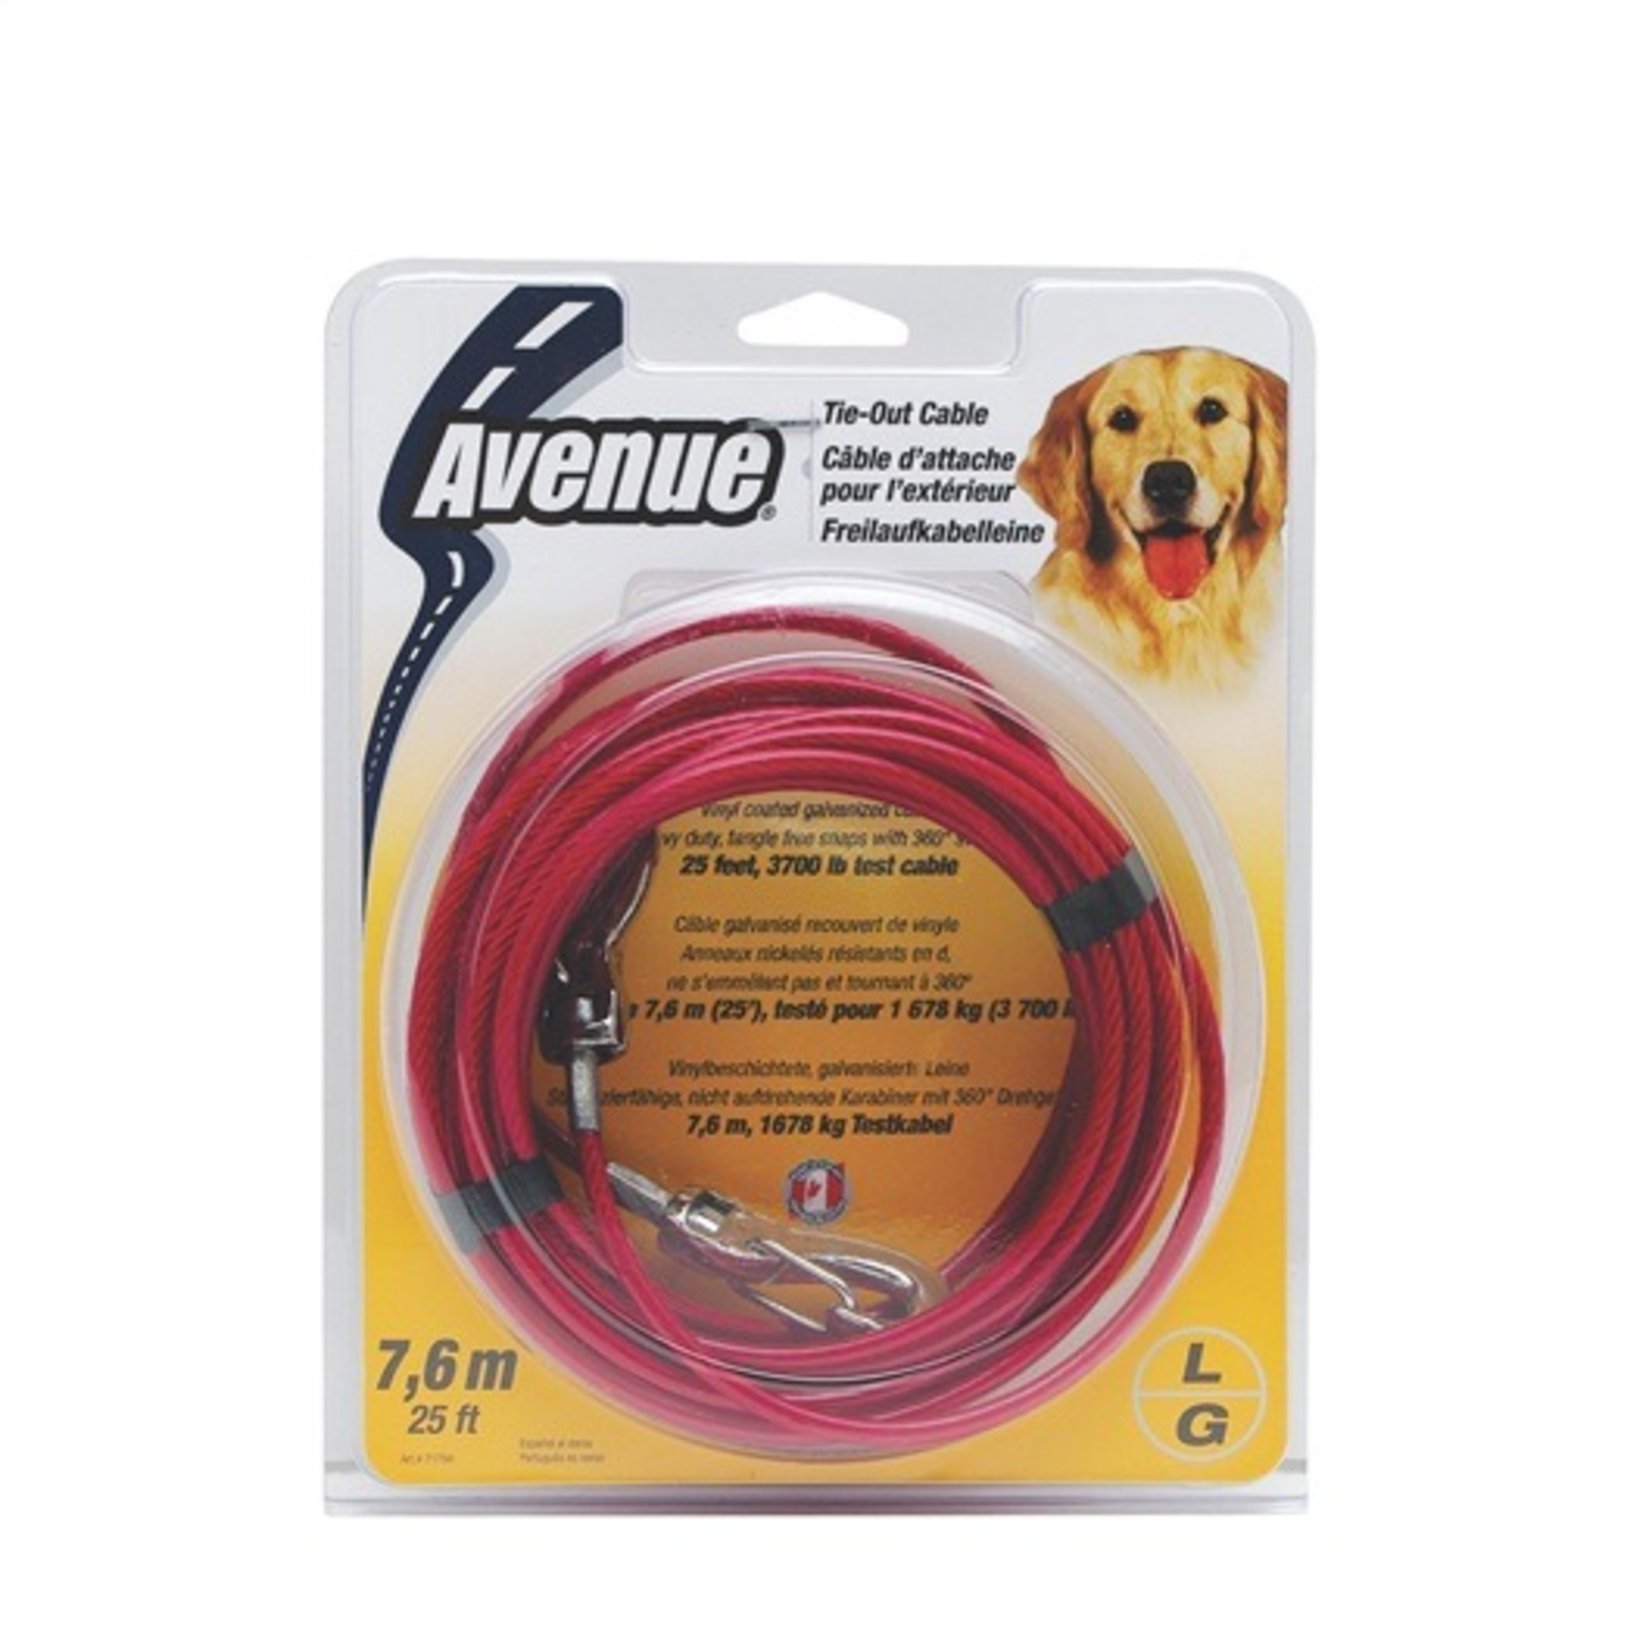 AVENUE (W) Avenue 25 Lrg Tie Out Cable Red-V